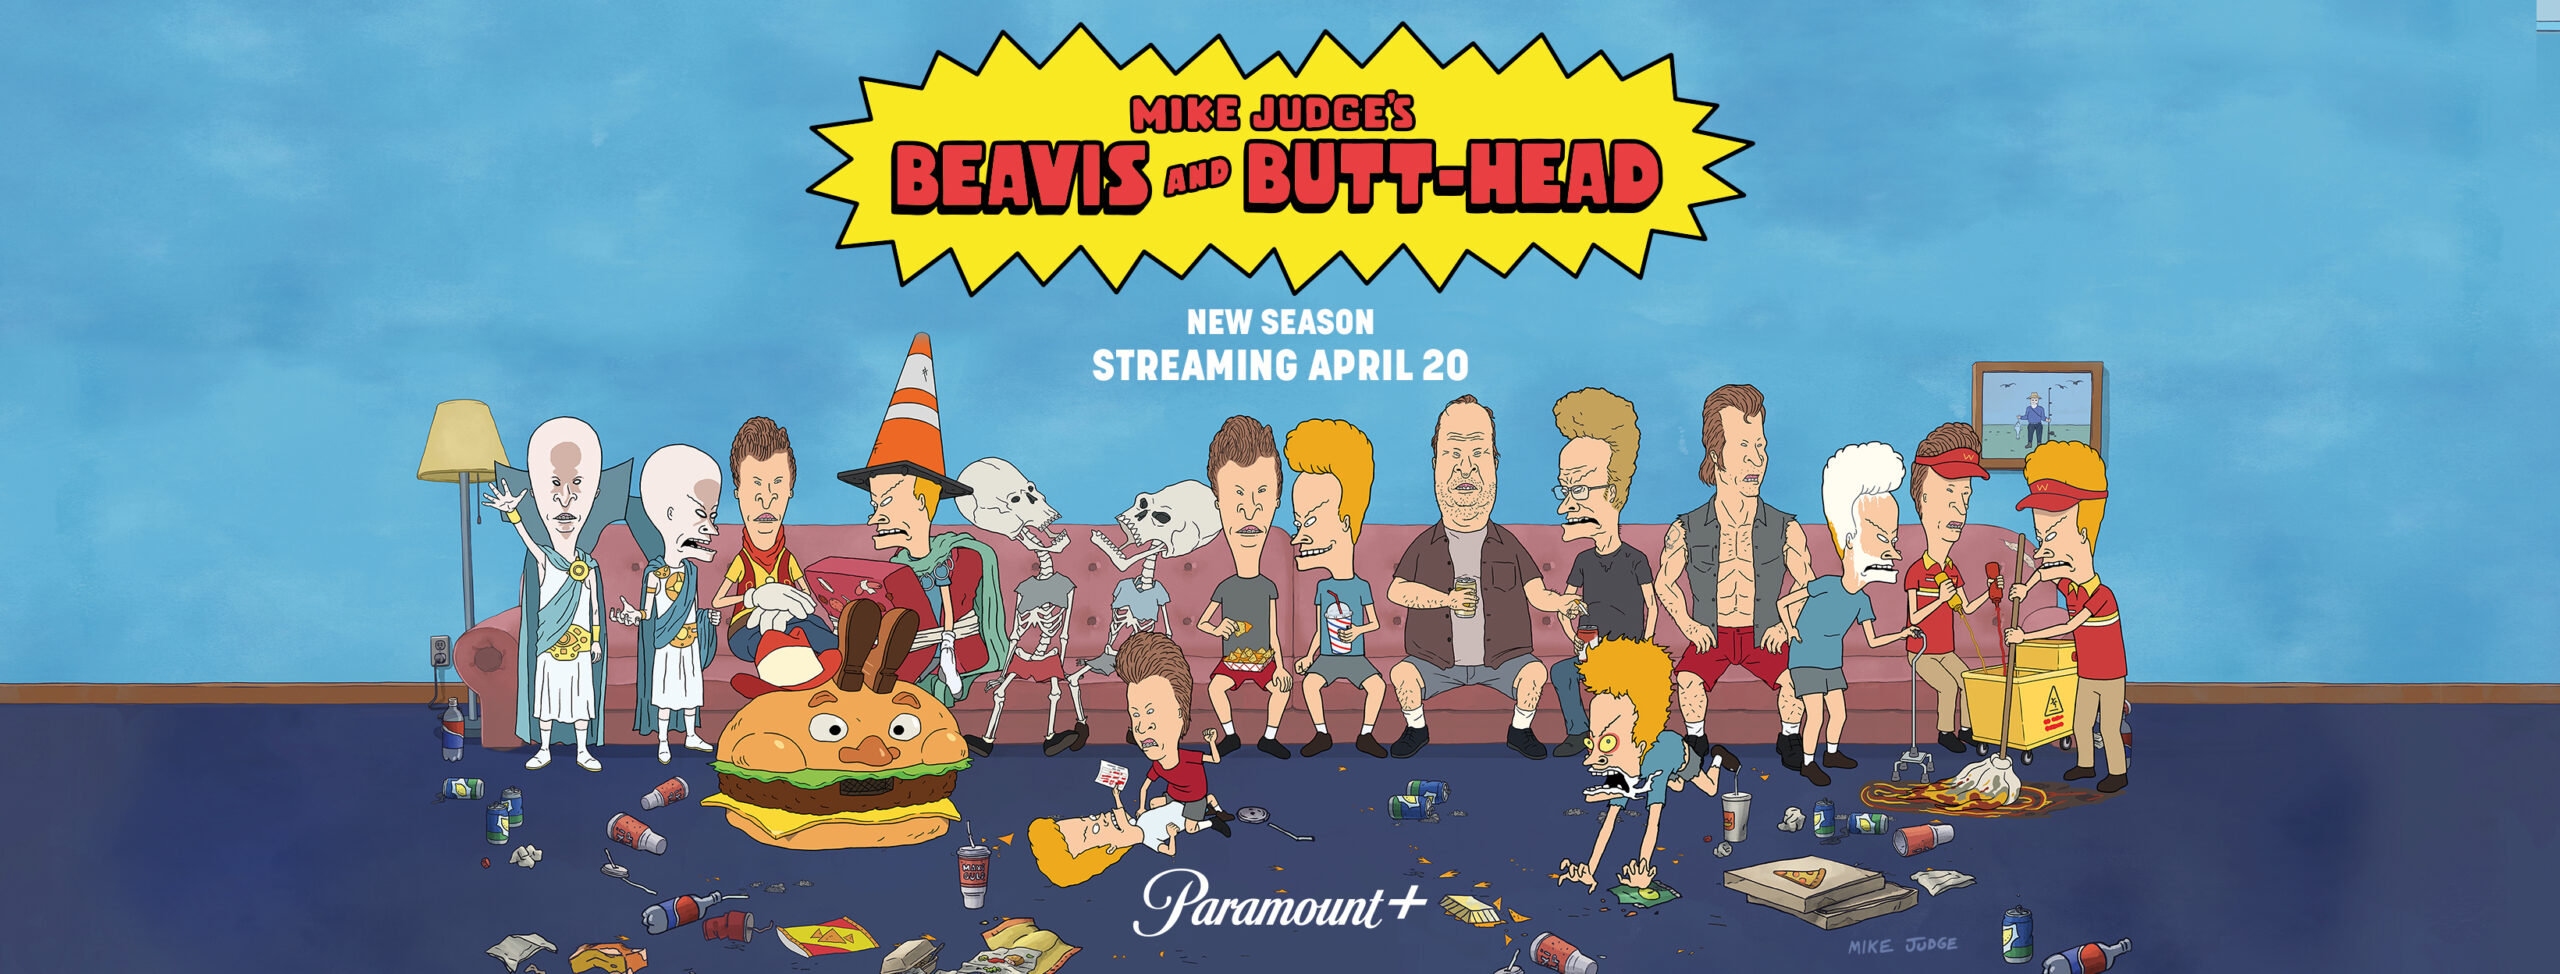 Paramount+ To Become 'South Park Streaming Home, 'Beavis and Butt